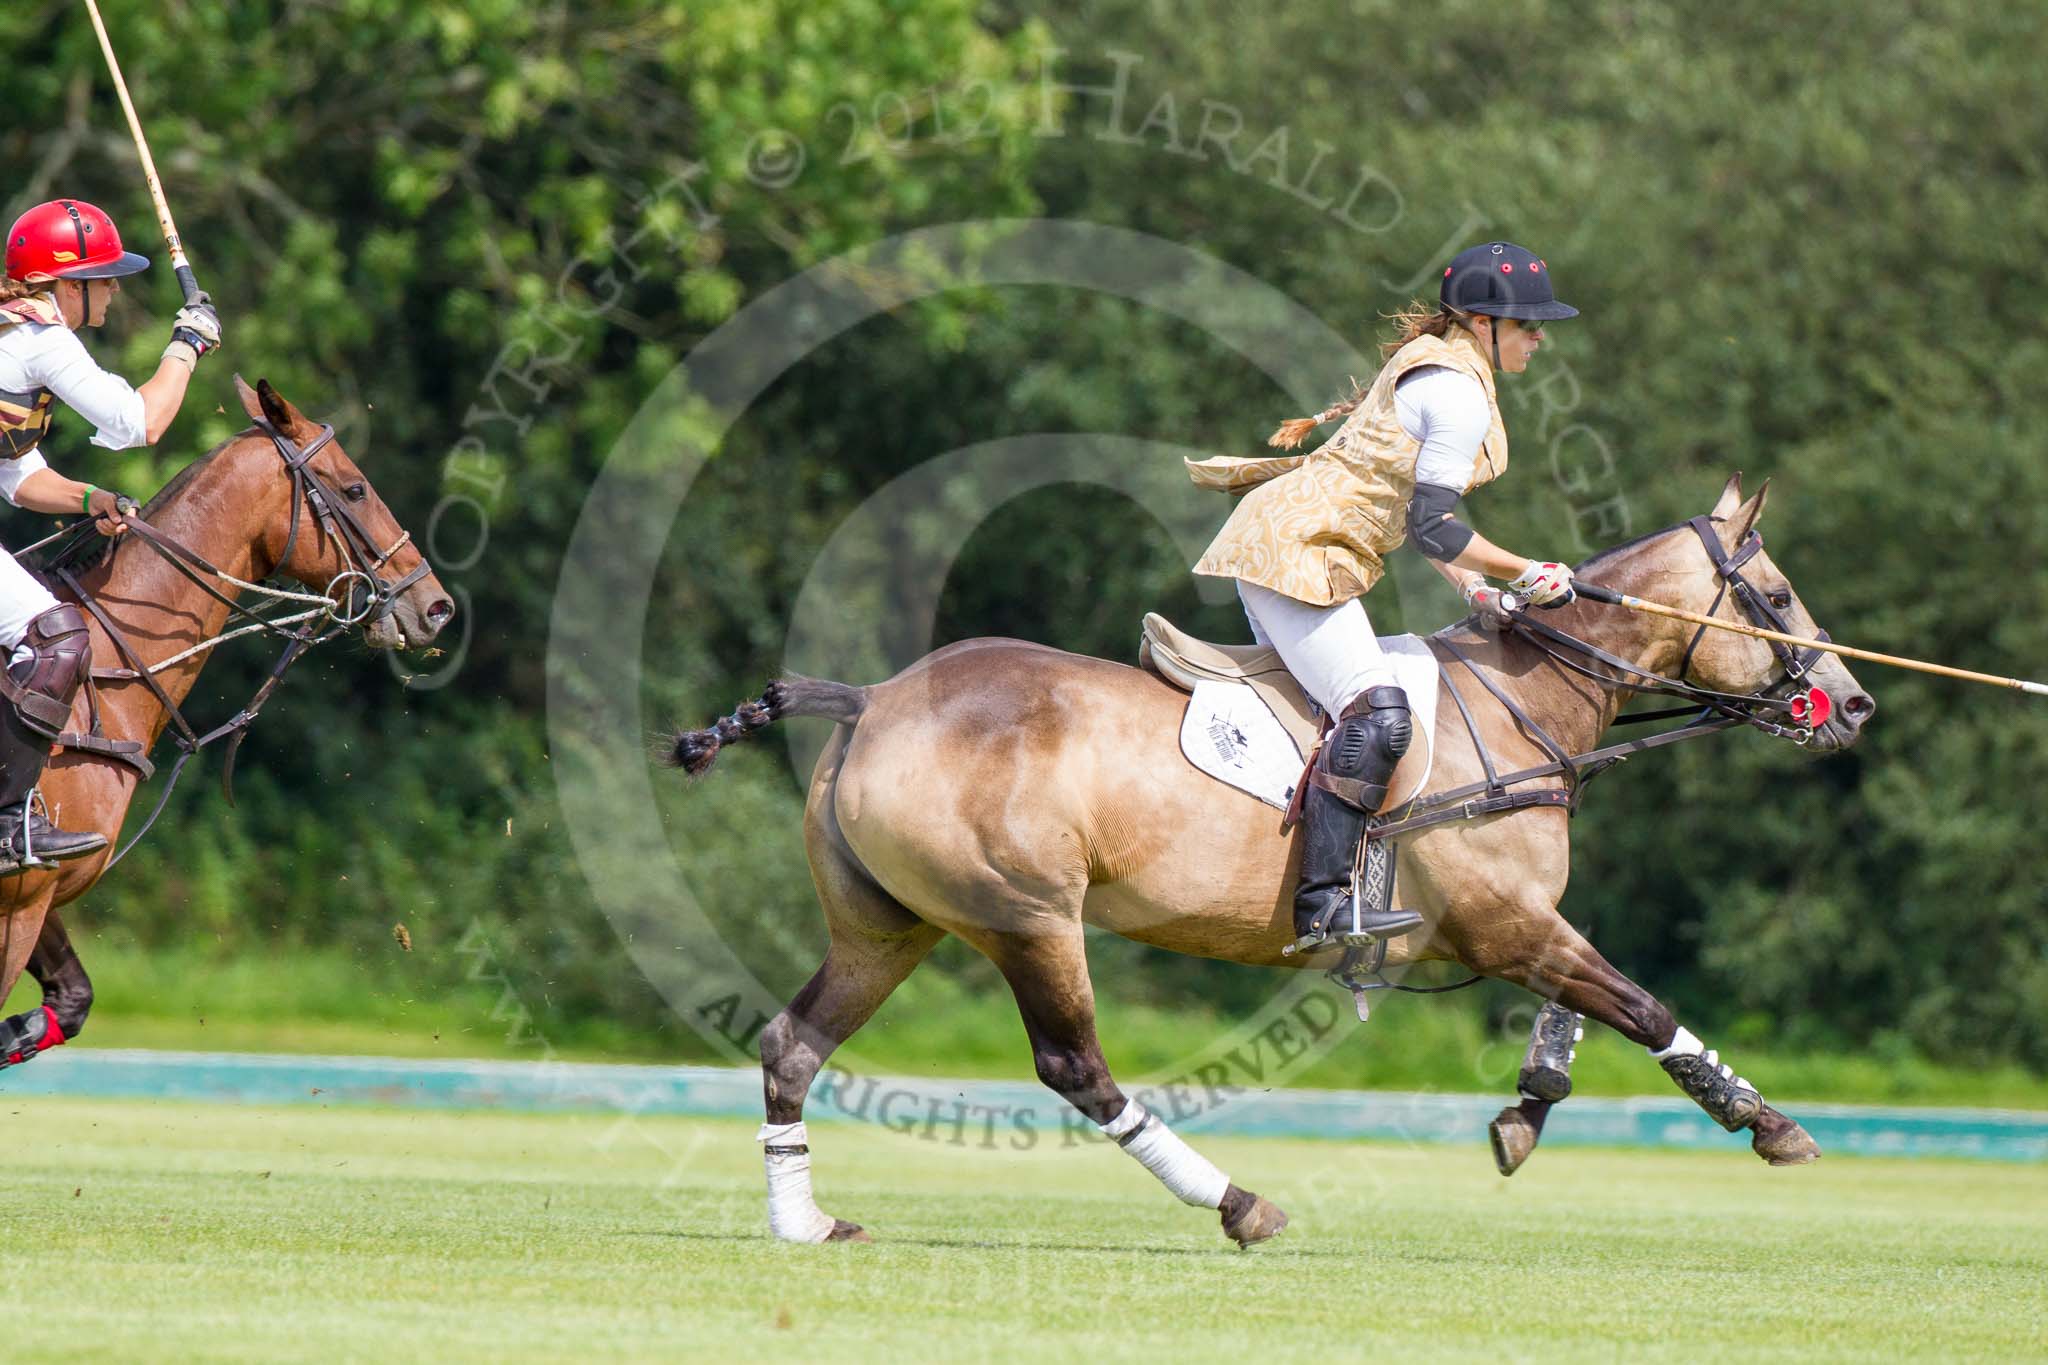 7th Heritage Polo Cup finals: The Amazons of Polo, sponsored by Polistas:
Heloise Lorentzen..
Hurtwood Park Polo Club,
Ewhurst Green,
Surrey,
United Kingdom,
on 05 August 2012 at 15:14, image #131